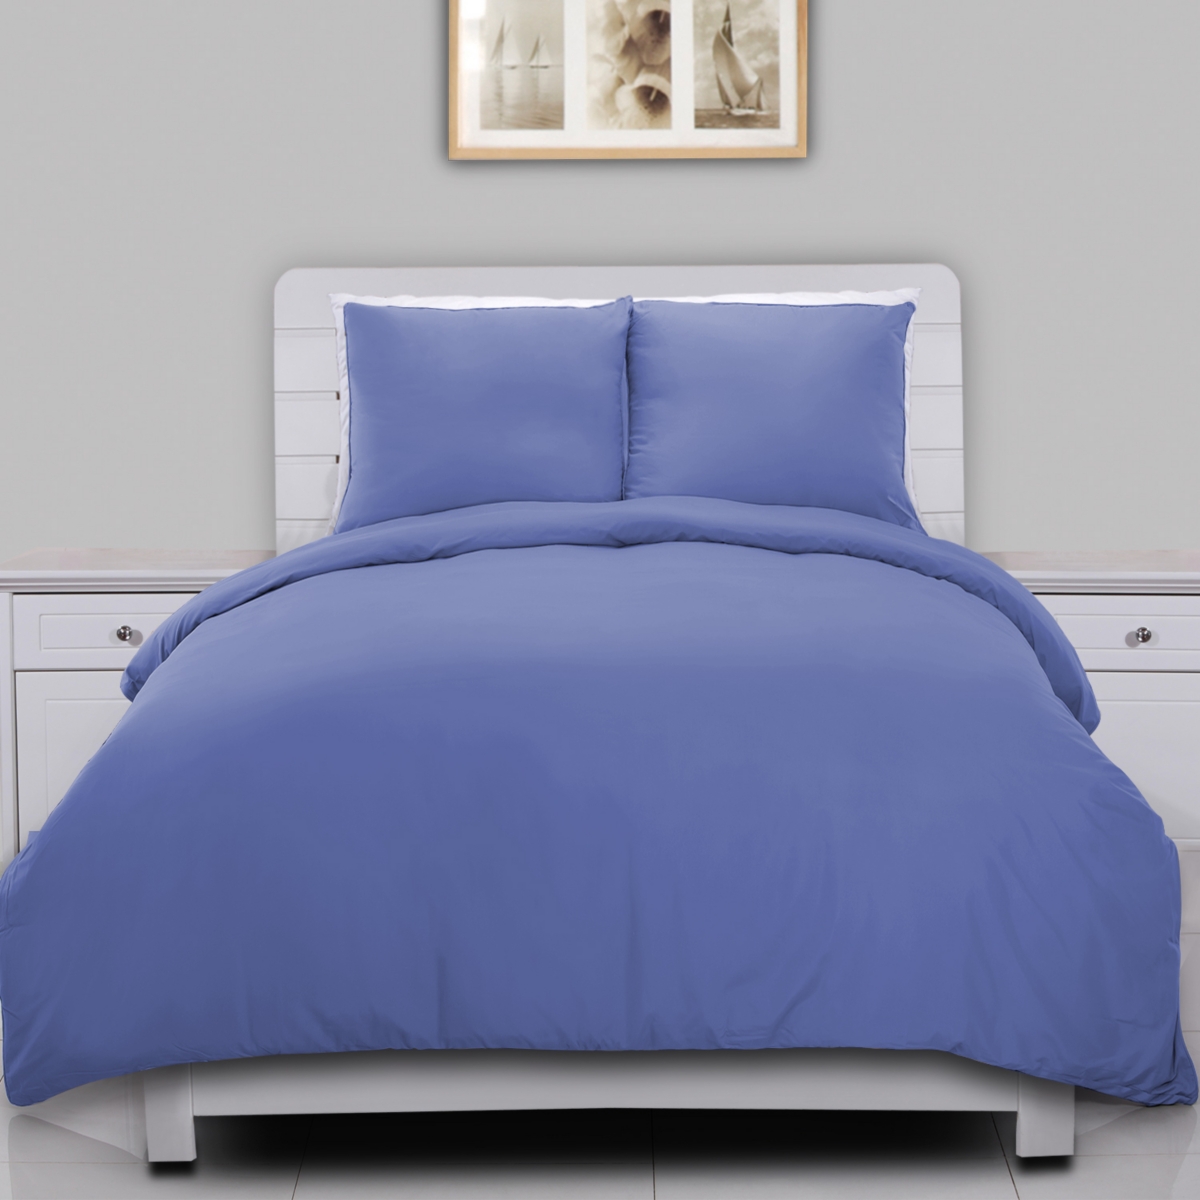 Lotus Home Water And Stain Resistant Microfiber Duvet Cover Mini Set In Blue